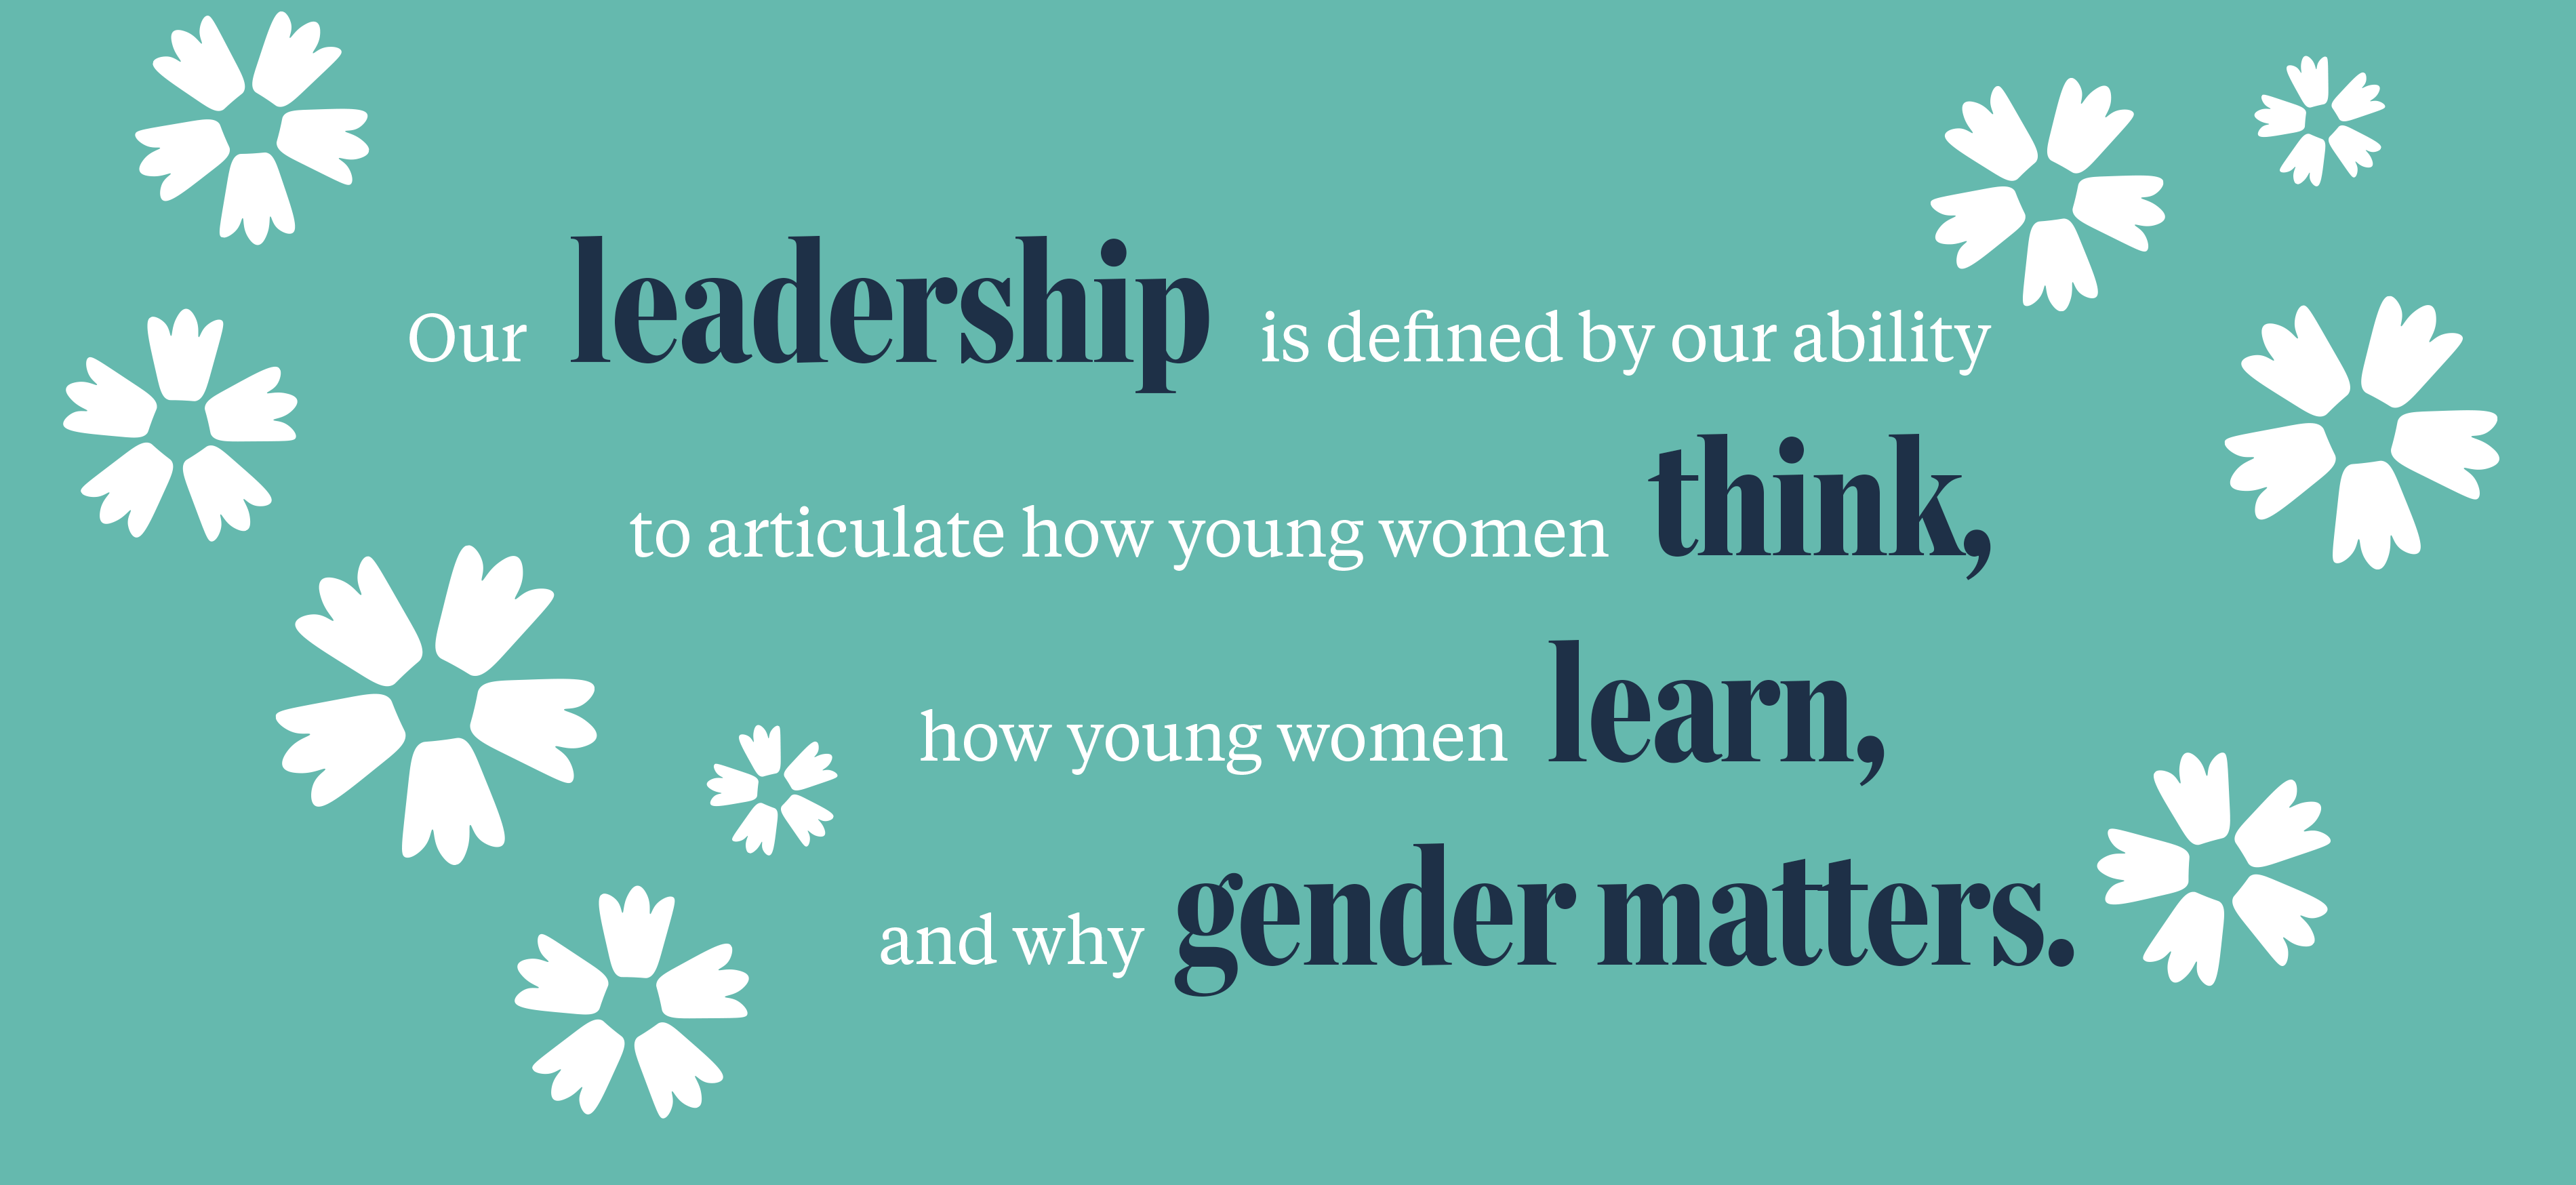 Our leadership is defined by our ability to articulate how young women think, how young women learn, and why gender matters.